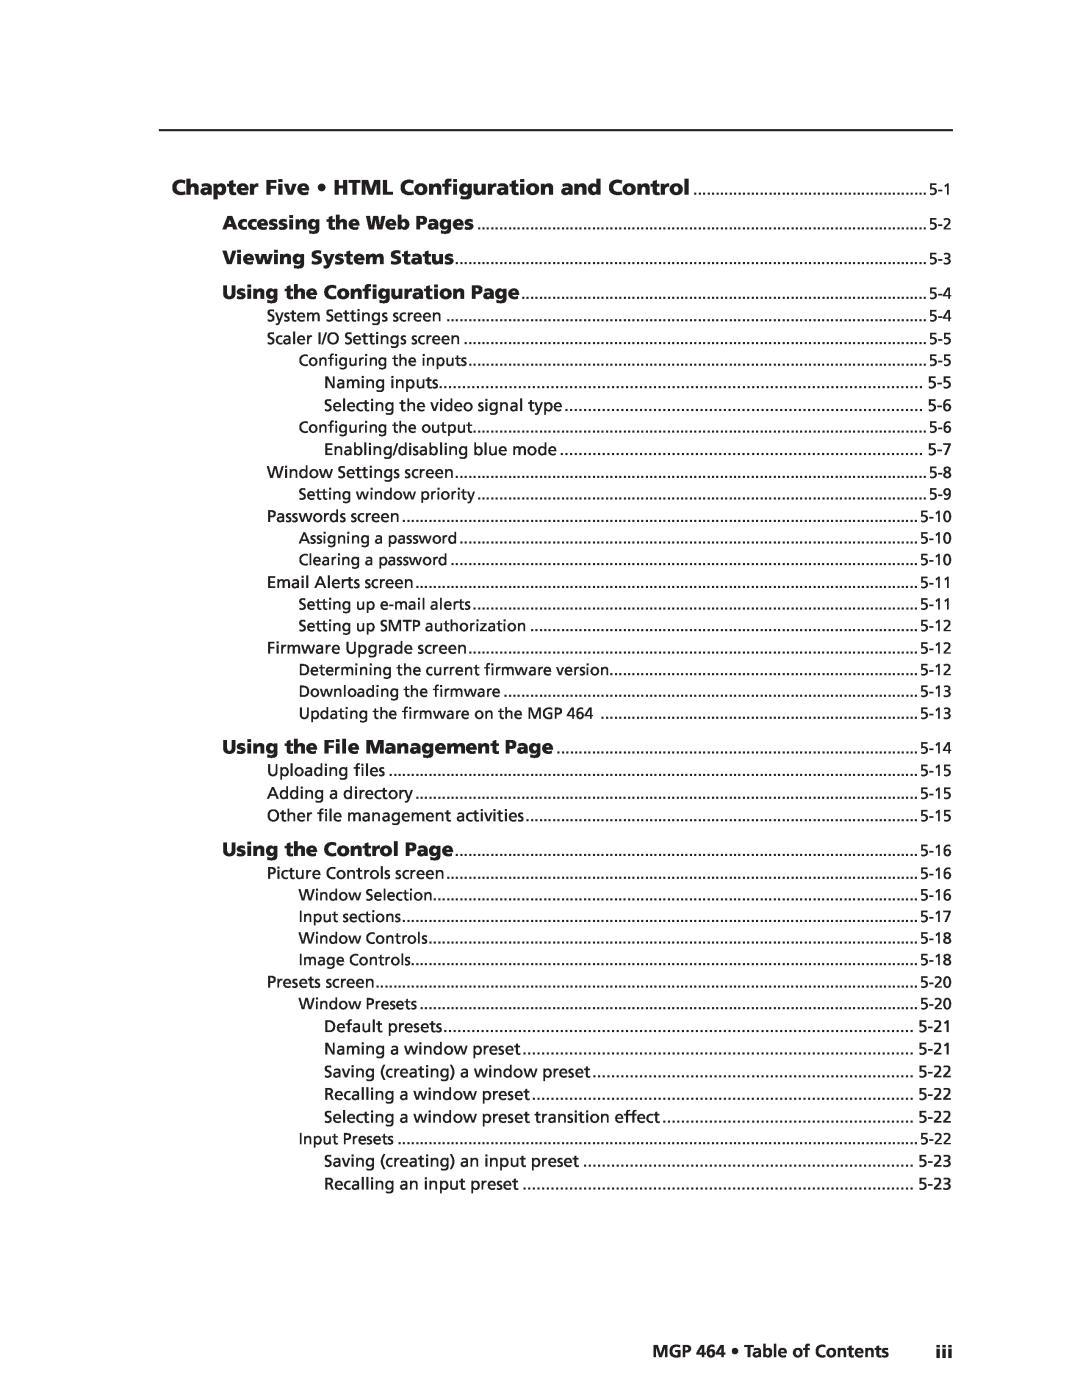 Extron electronic MGP 464 DI manual Chapter Five HTML Configuration and Control, Preliminary, MGP 464 Table of Contents 